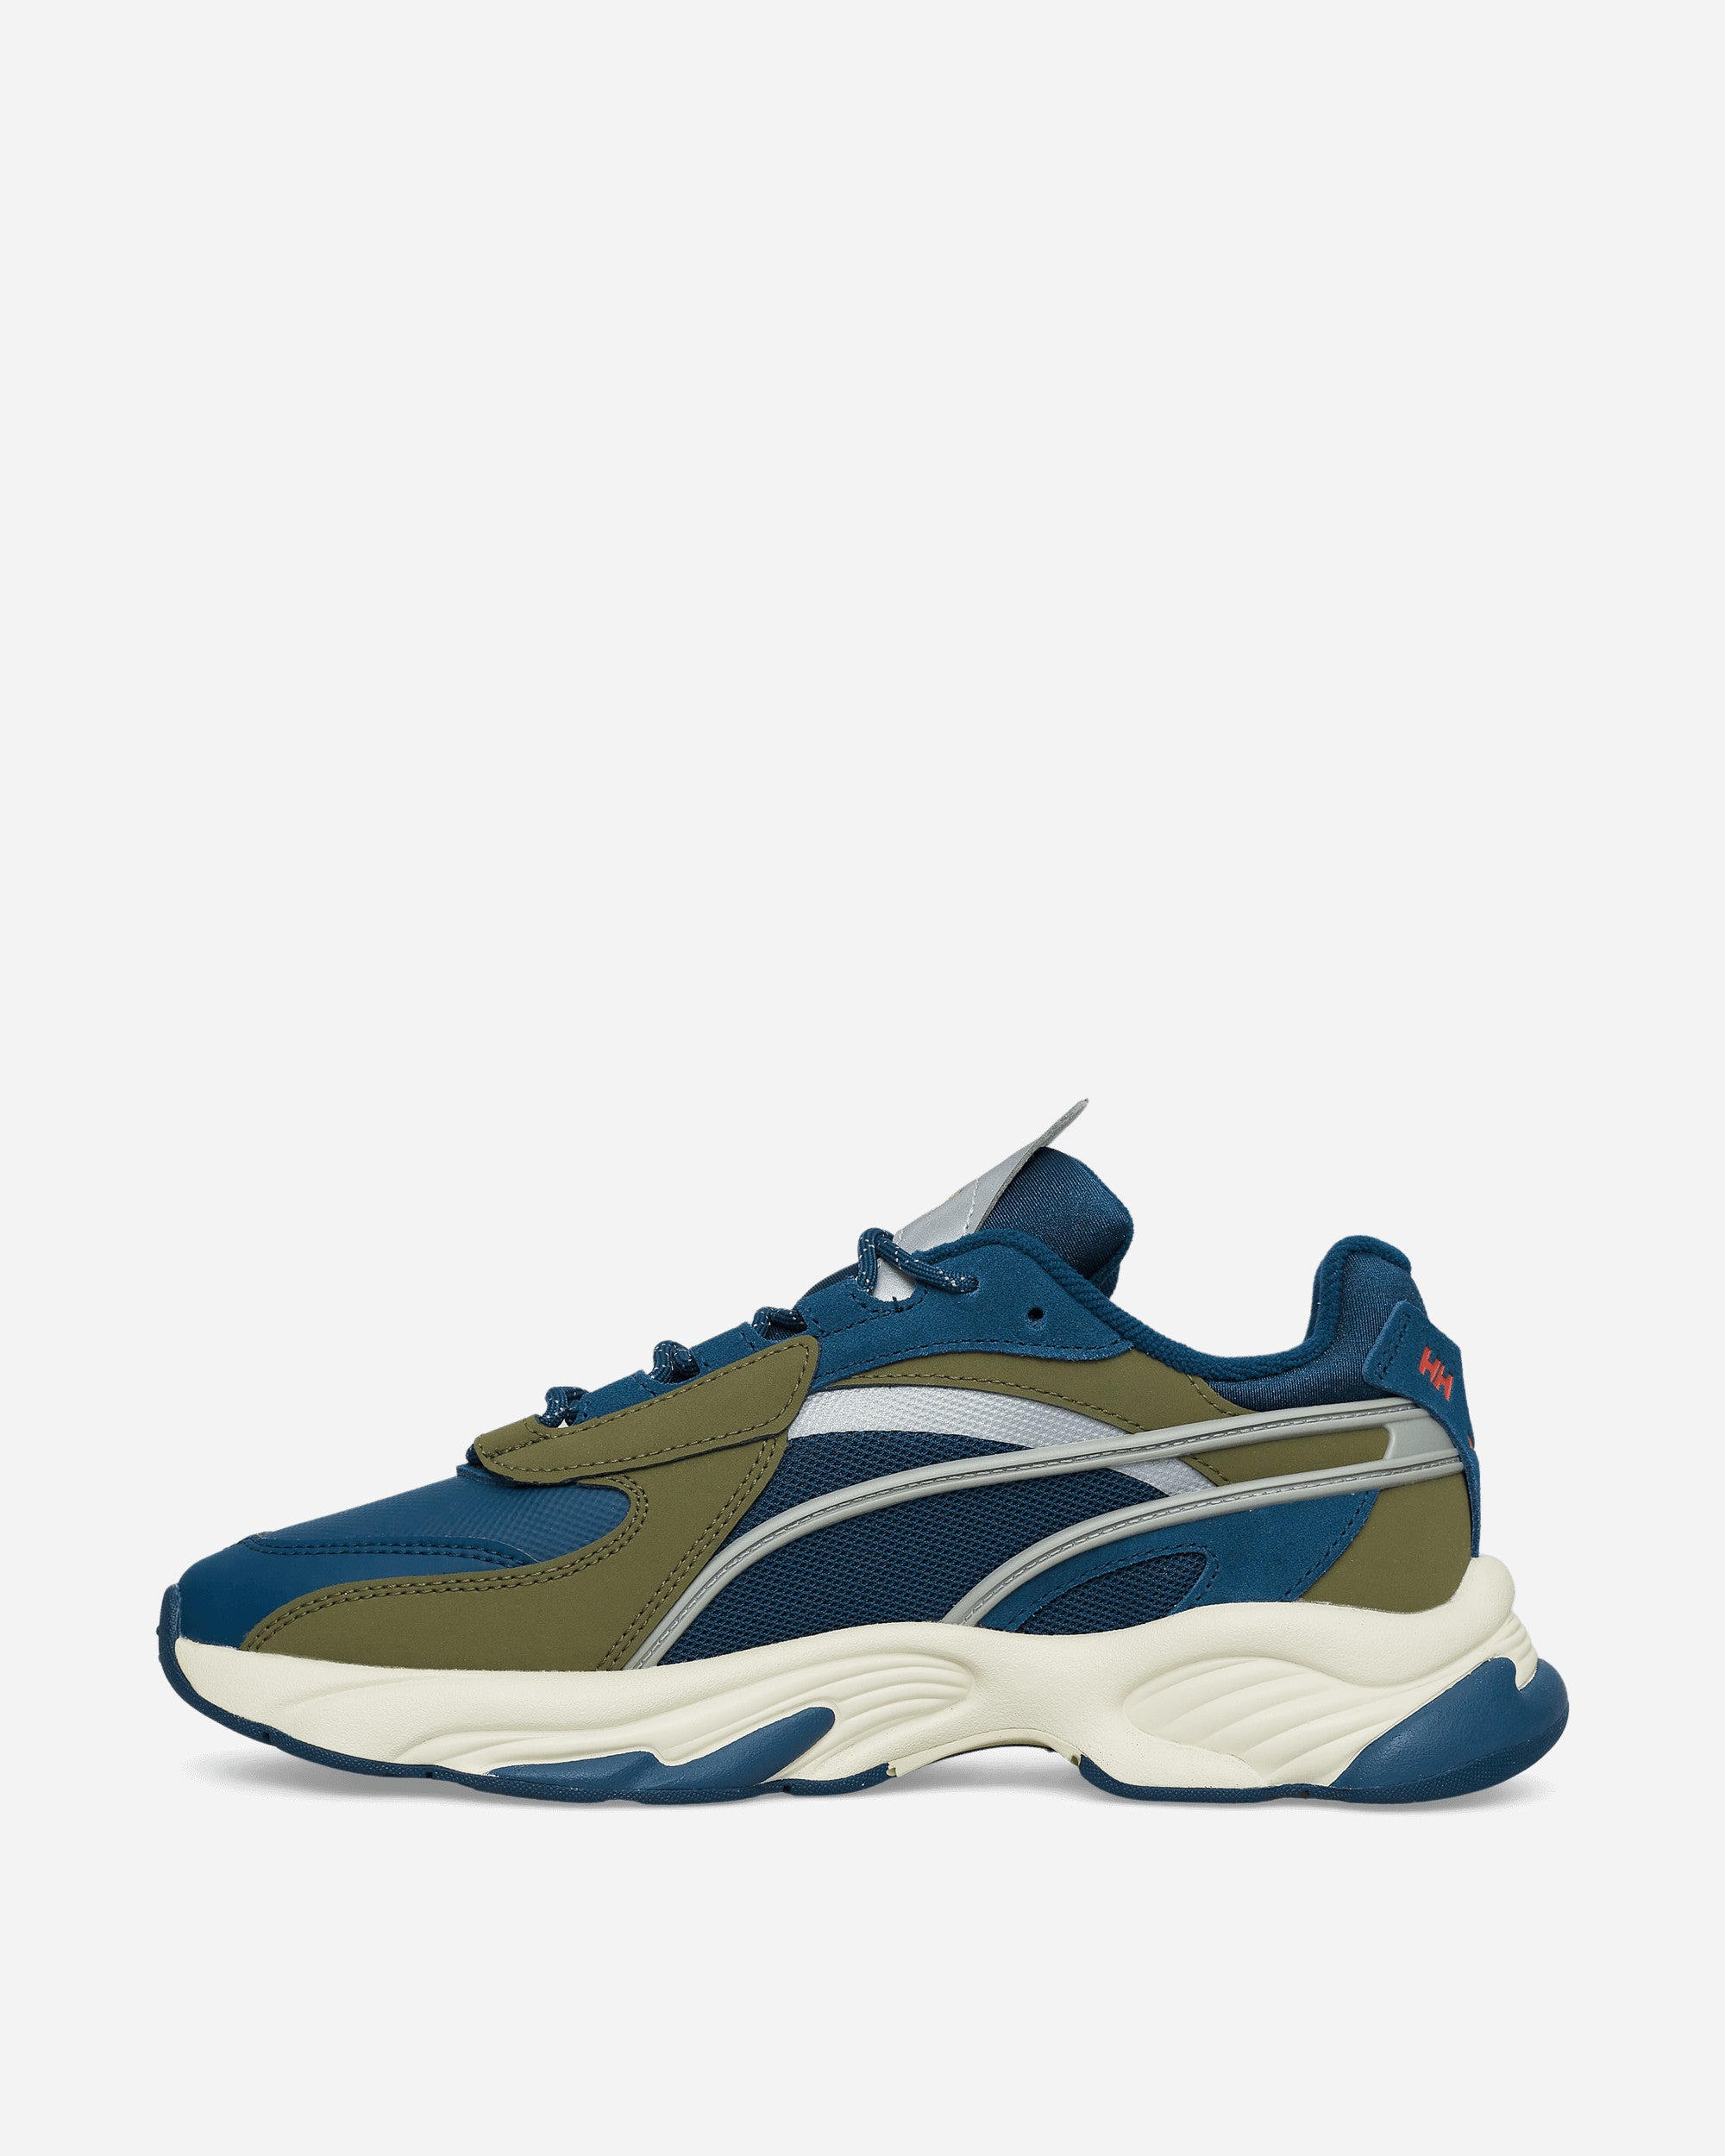 Puma Rs-Connect Helly Hansen Intense Blue/White Asparagus Sneakers Low 382336-01